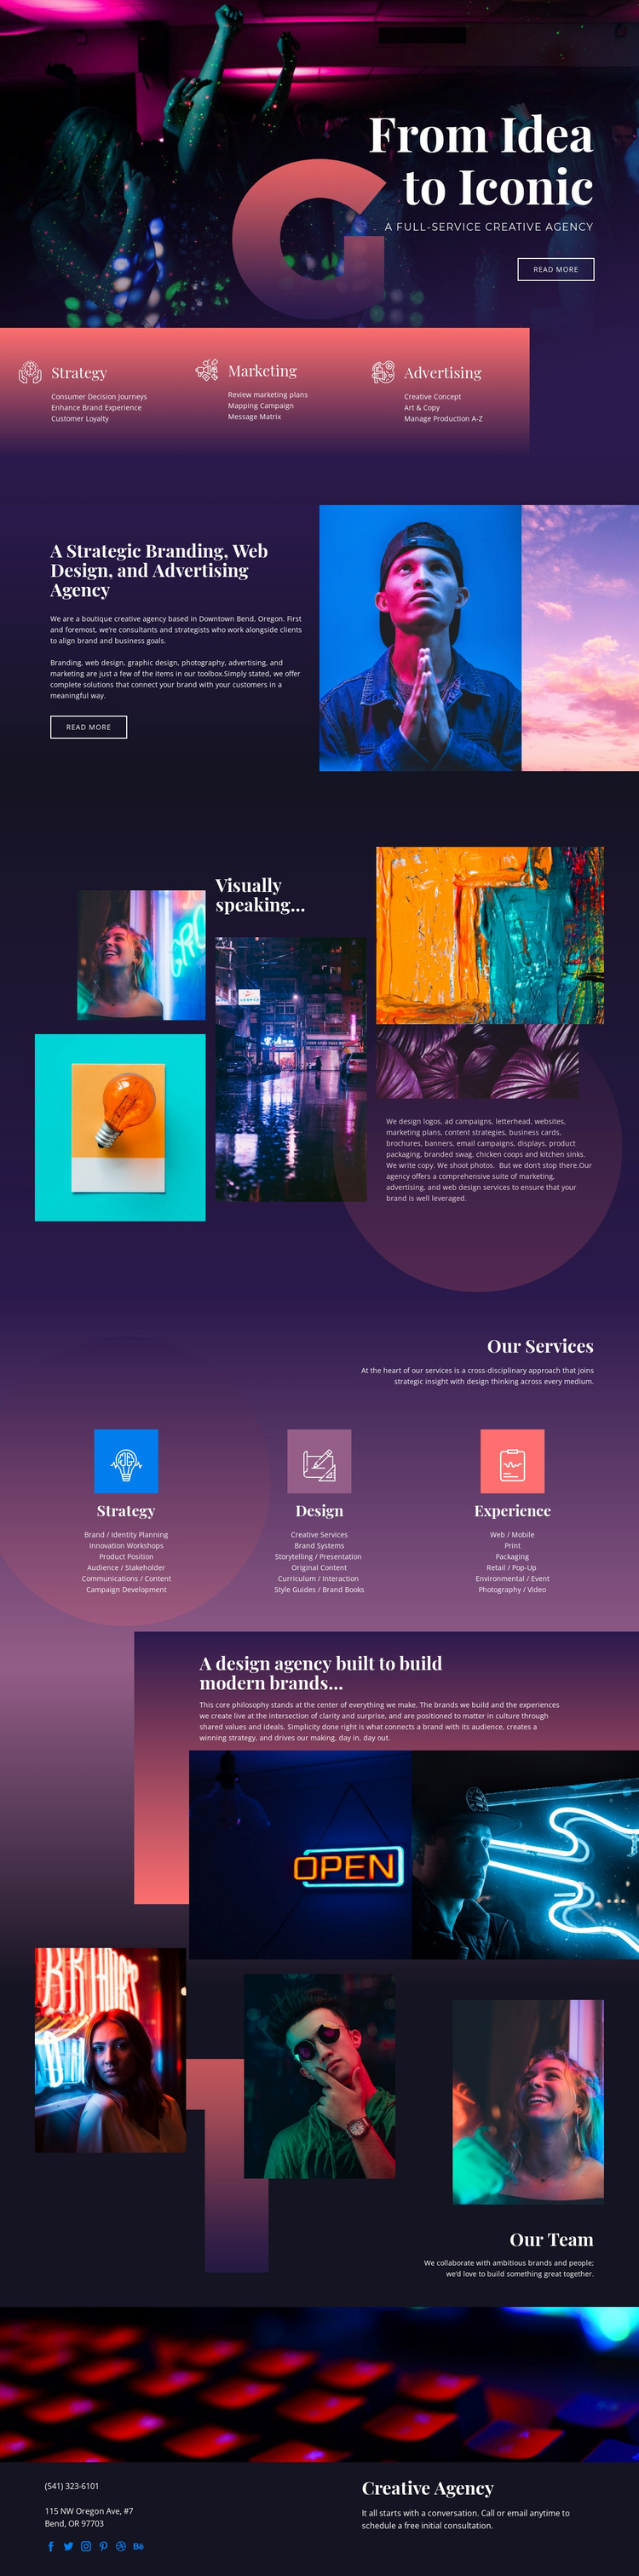 Iconic ideas of art Website Template